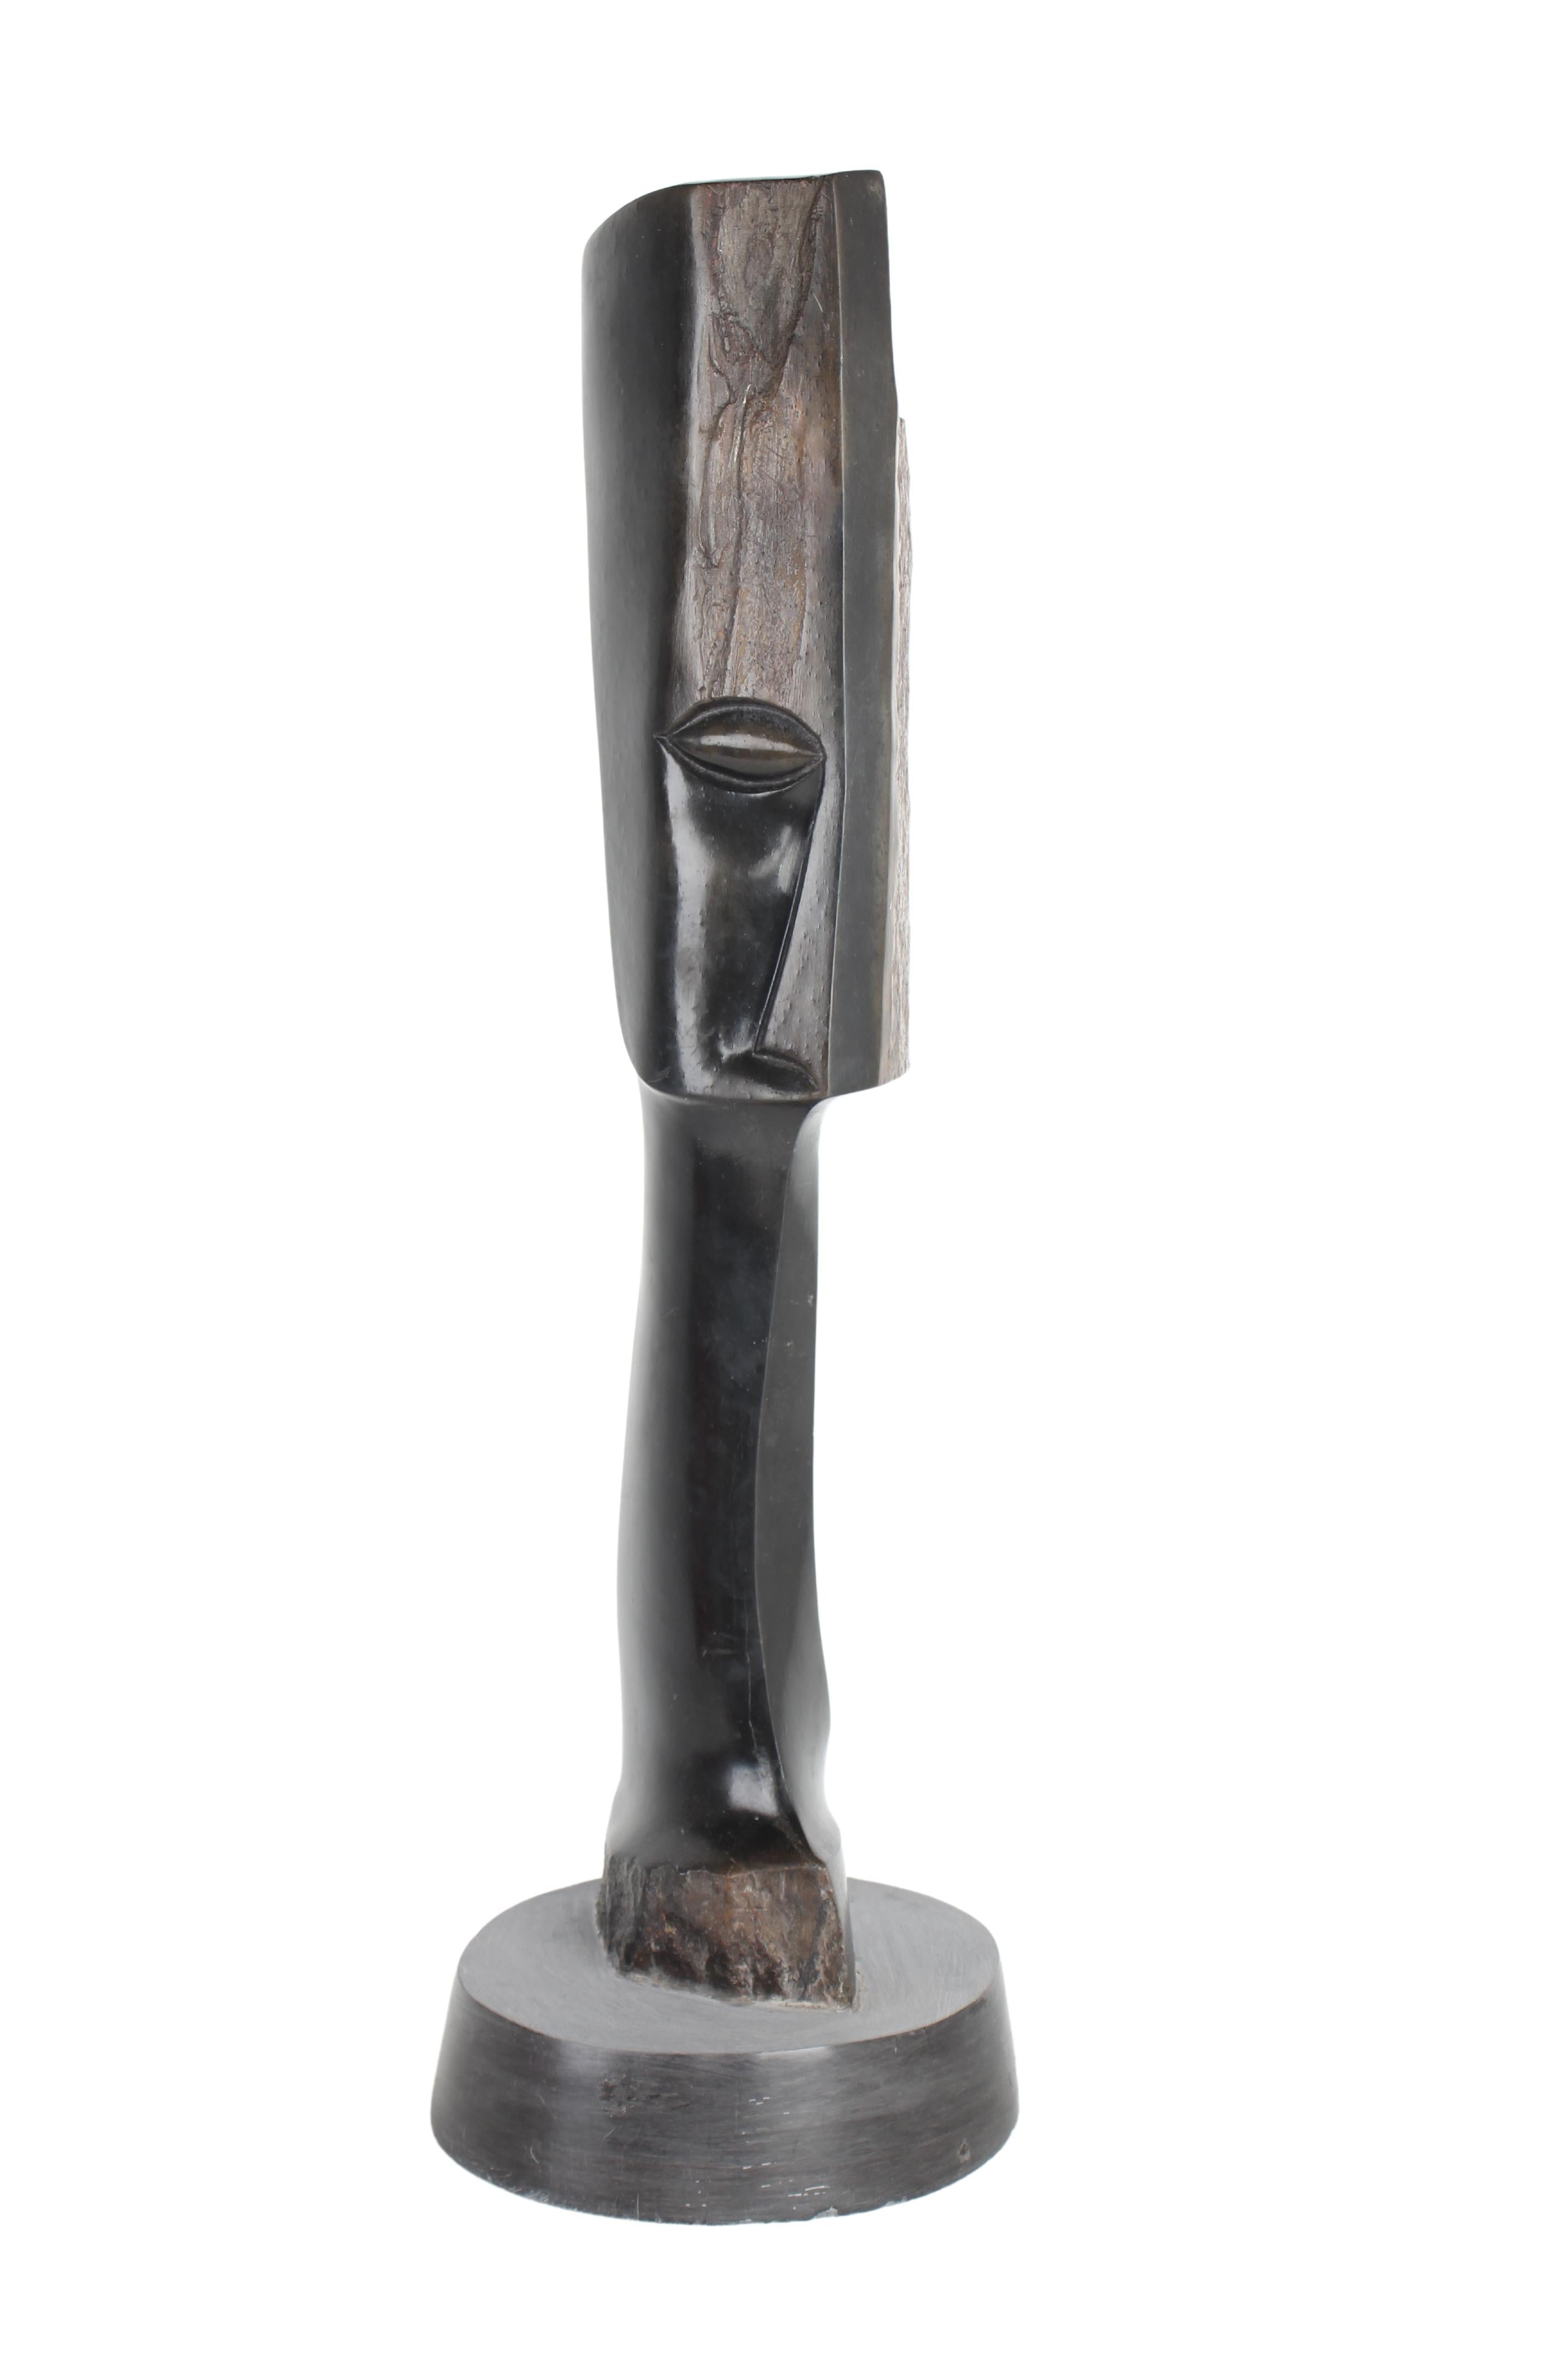 Shona Tribe Wonderstone Cubic Faces (Contemporary) ~24.8" Tall (New 2024)